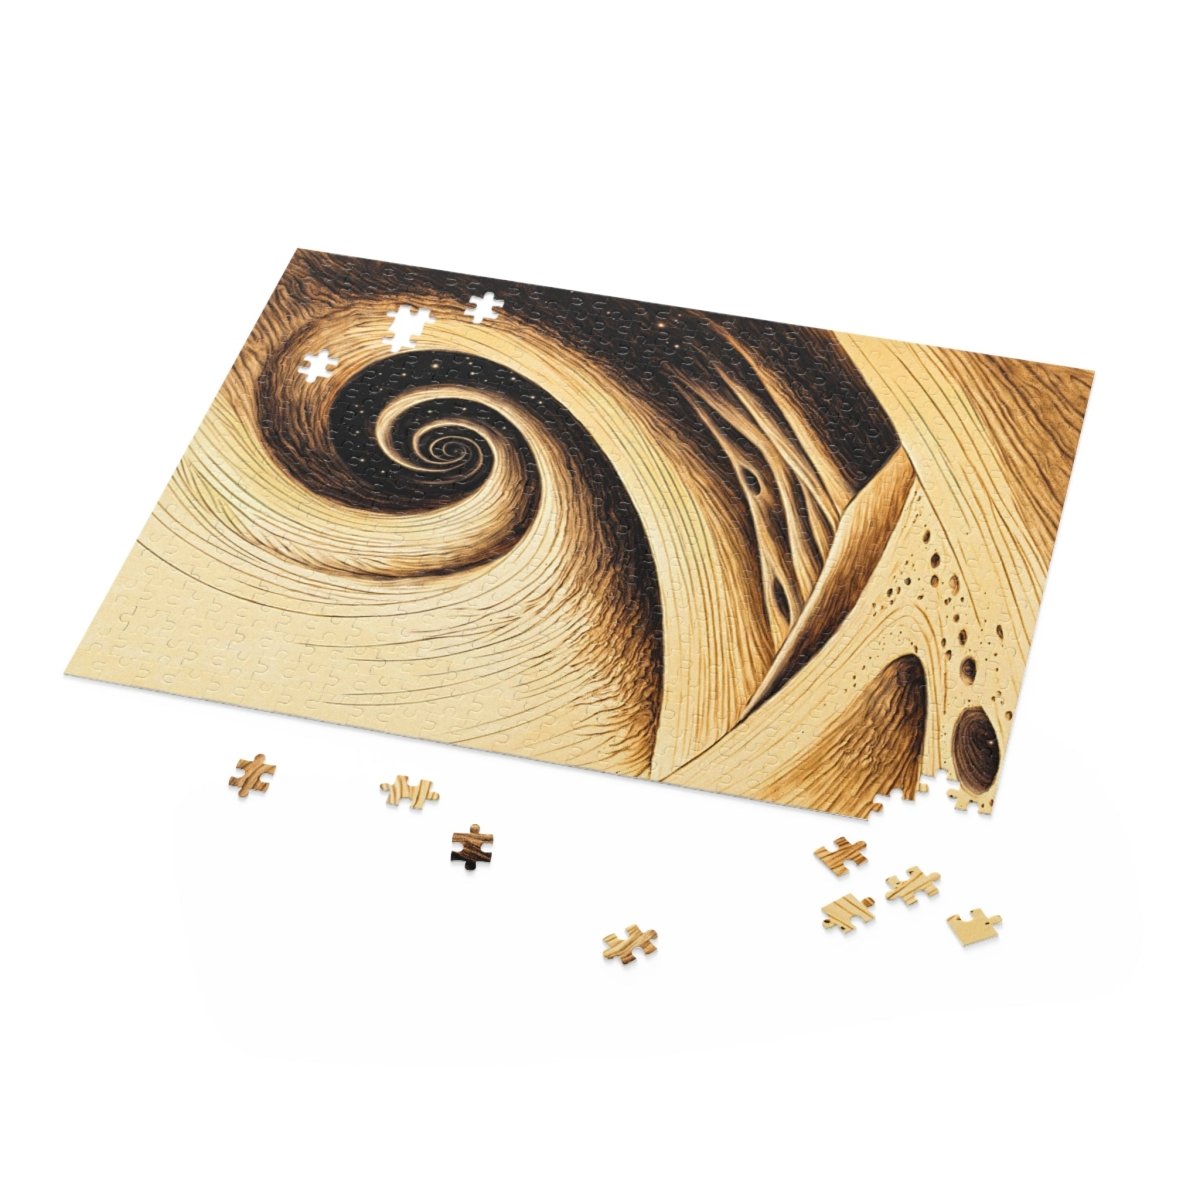 Swirling dunes - Puzzle - Puzzle - Ever colorful